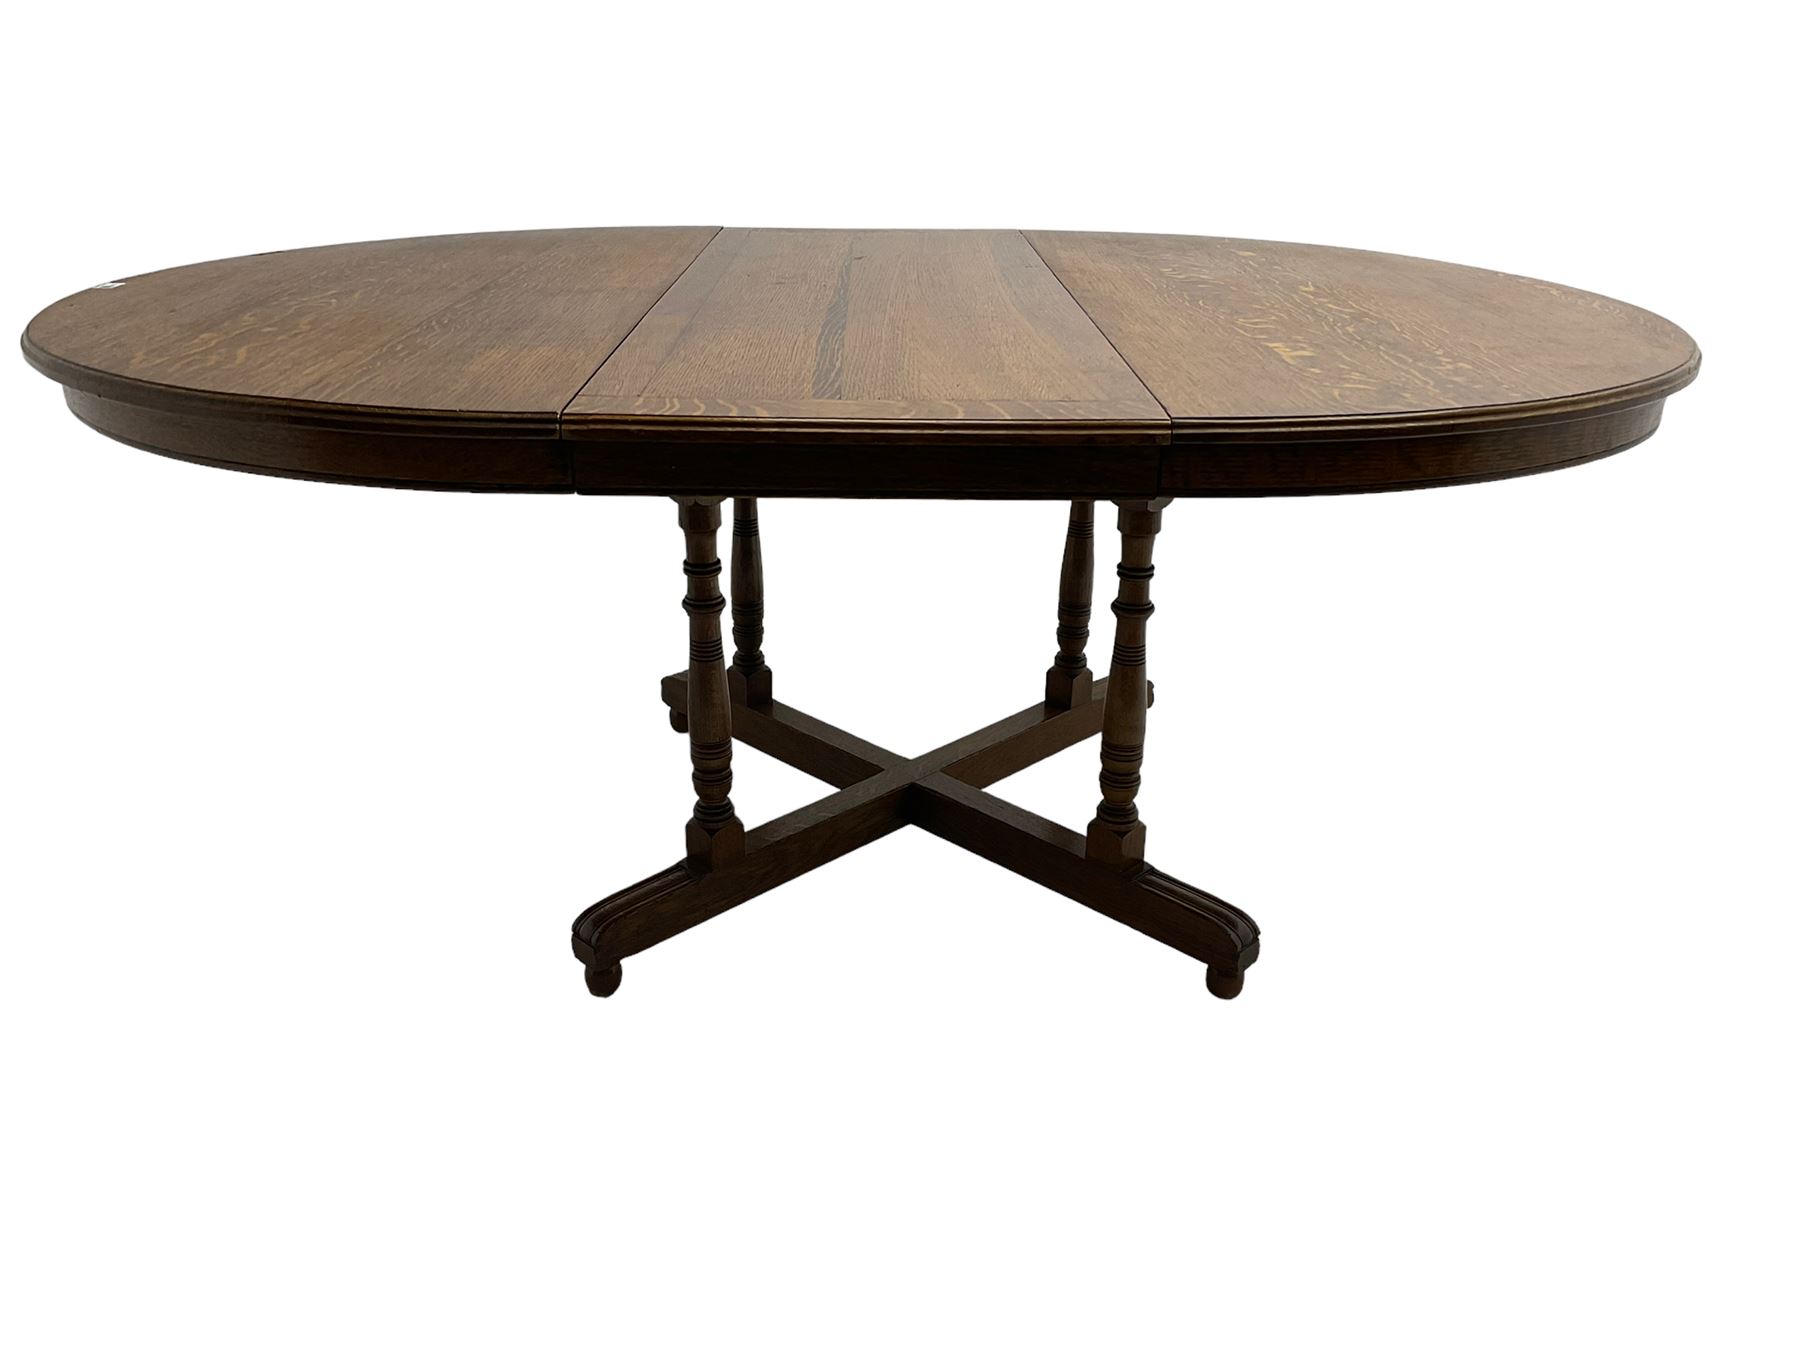 Early 20th century oak dining table - Image 3 of 8